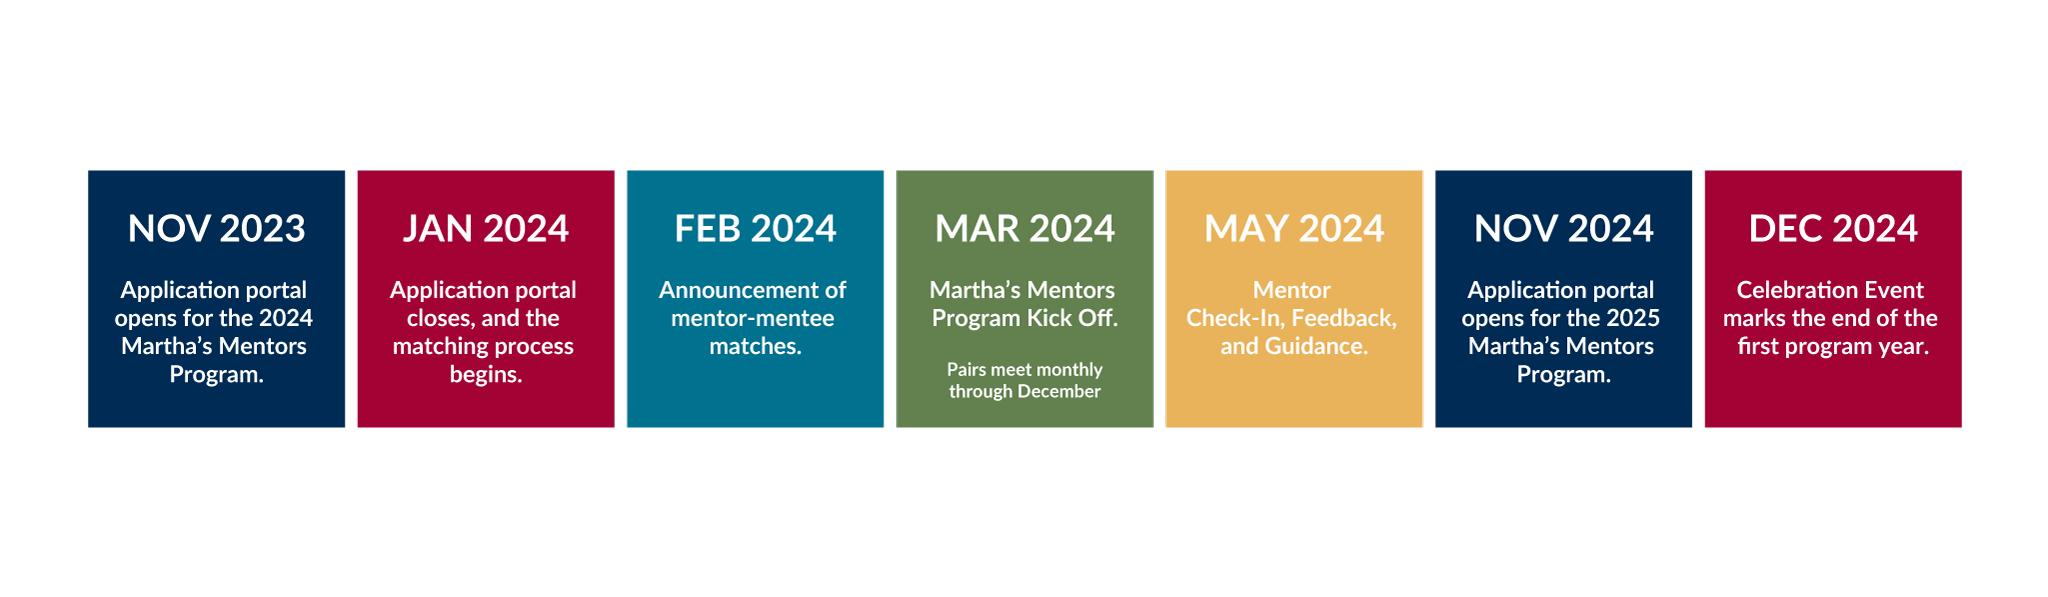 November 2023: Application portal opens for the 2024 Martha's Mentors Program. January 2024: Application portal closes, and the matching process begins. February 2024: Announcement of mentor-mentee matches. March 2024: Martha's Mentor's Program Kick Off. Pairs meet monthly through December. May 2024: Mentor Check-In, Feedback, and Guidance. November 2024: Application portal opens for the 2025 Martha's Mentors Program. December 2024: Celebration Event marks the end of the first program year.